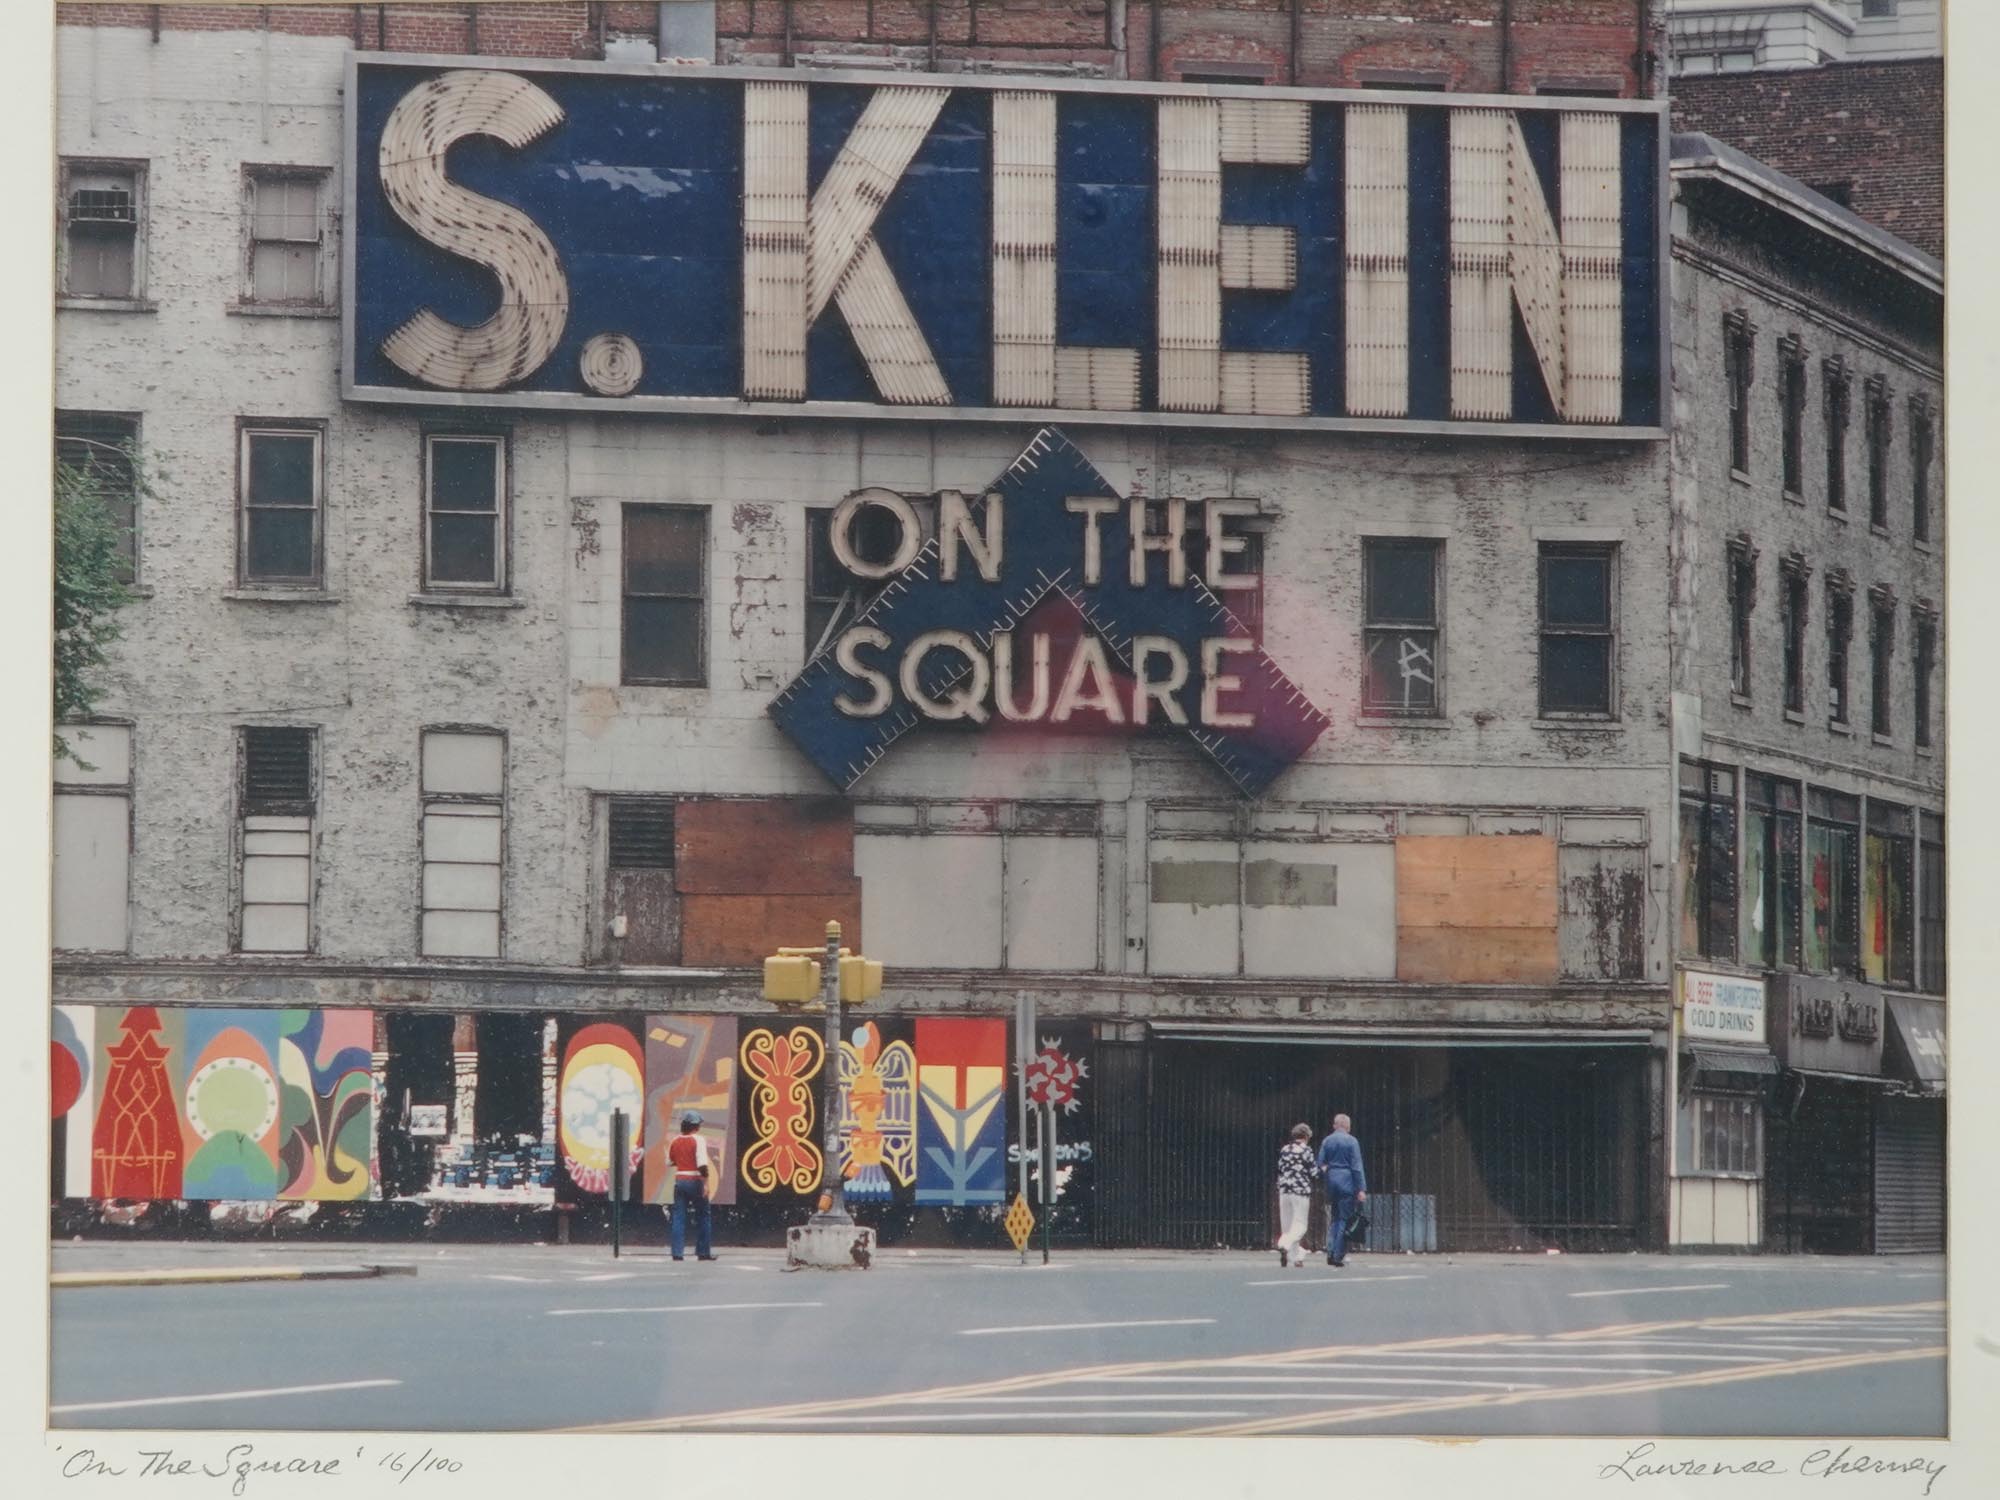 NYC S. KLEIN ON THE SQUARE PHOTO LAWRENCE CHENEY PIC-1